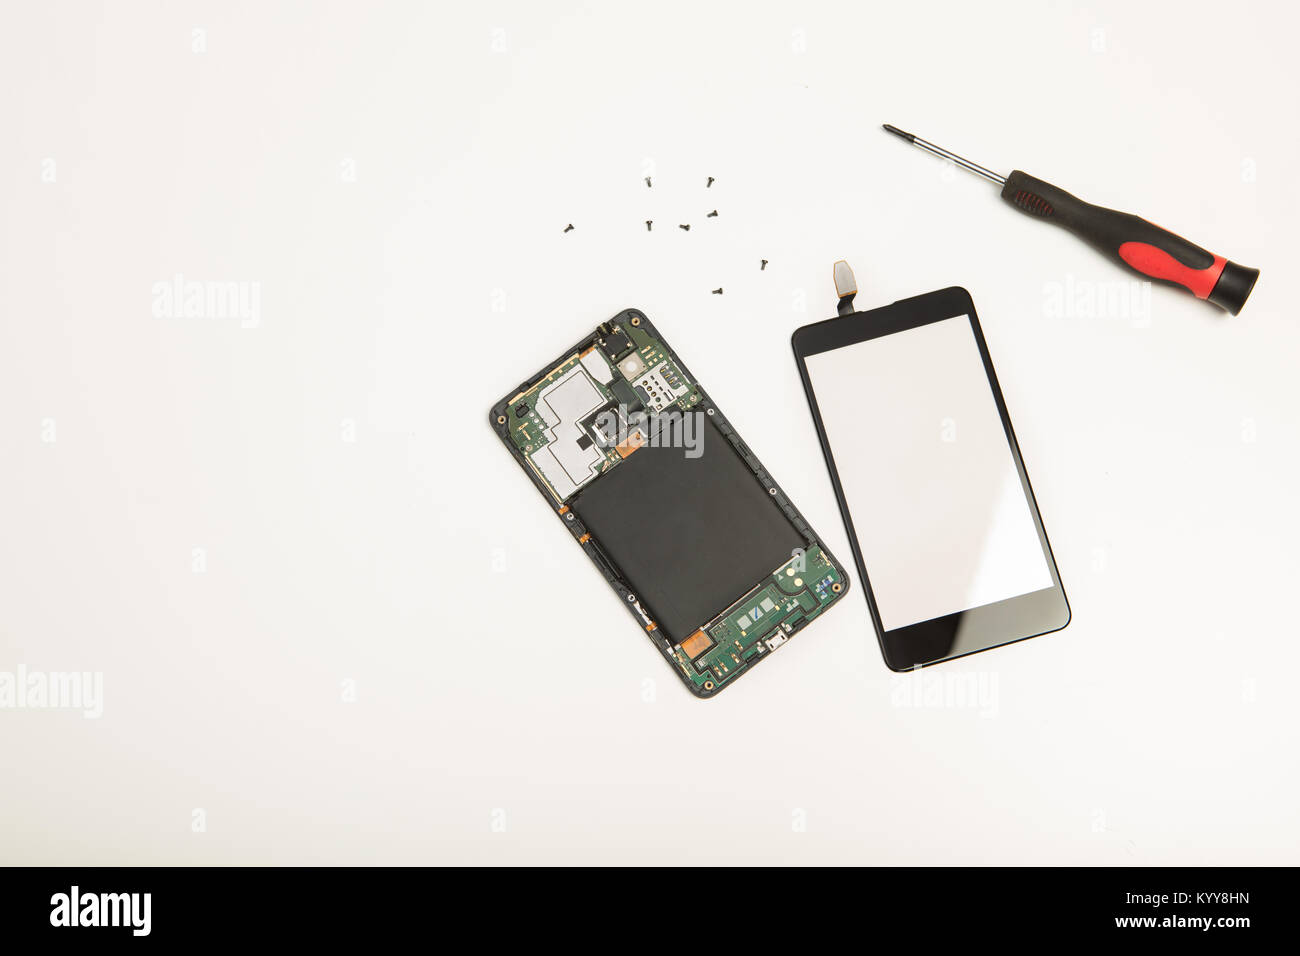 Opened smartphone showing the components, screen and circuitry together with a screwdriver and tiny screws on a white background with copy space Stock Photo